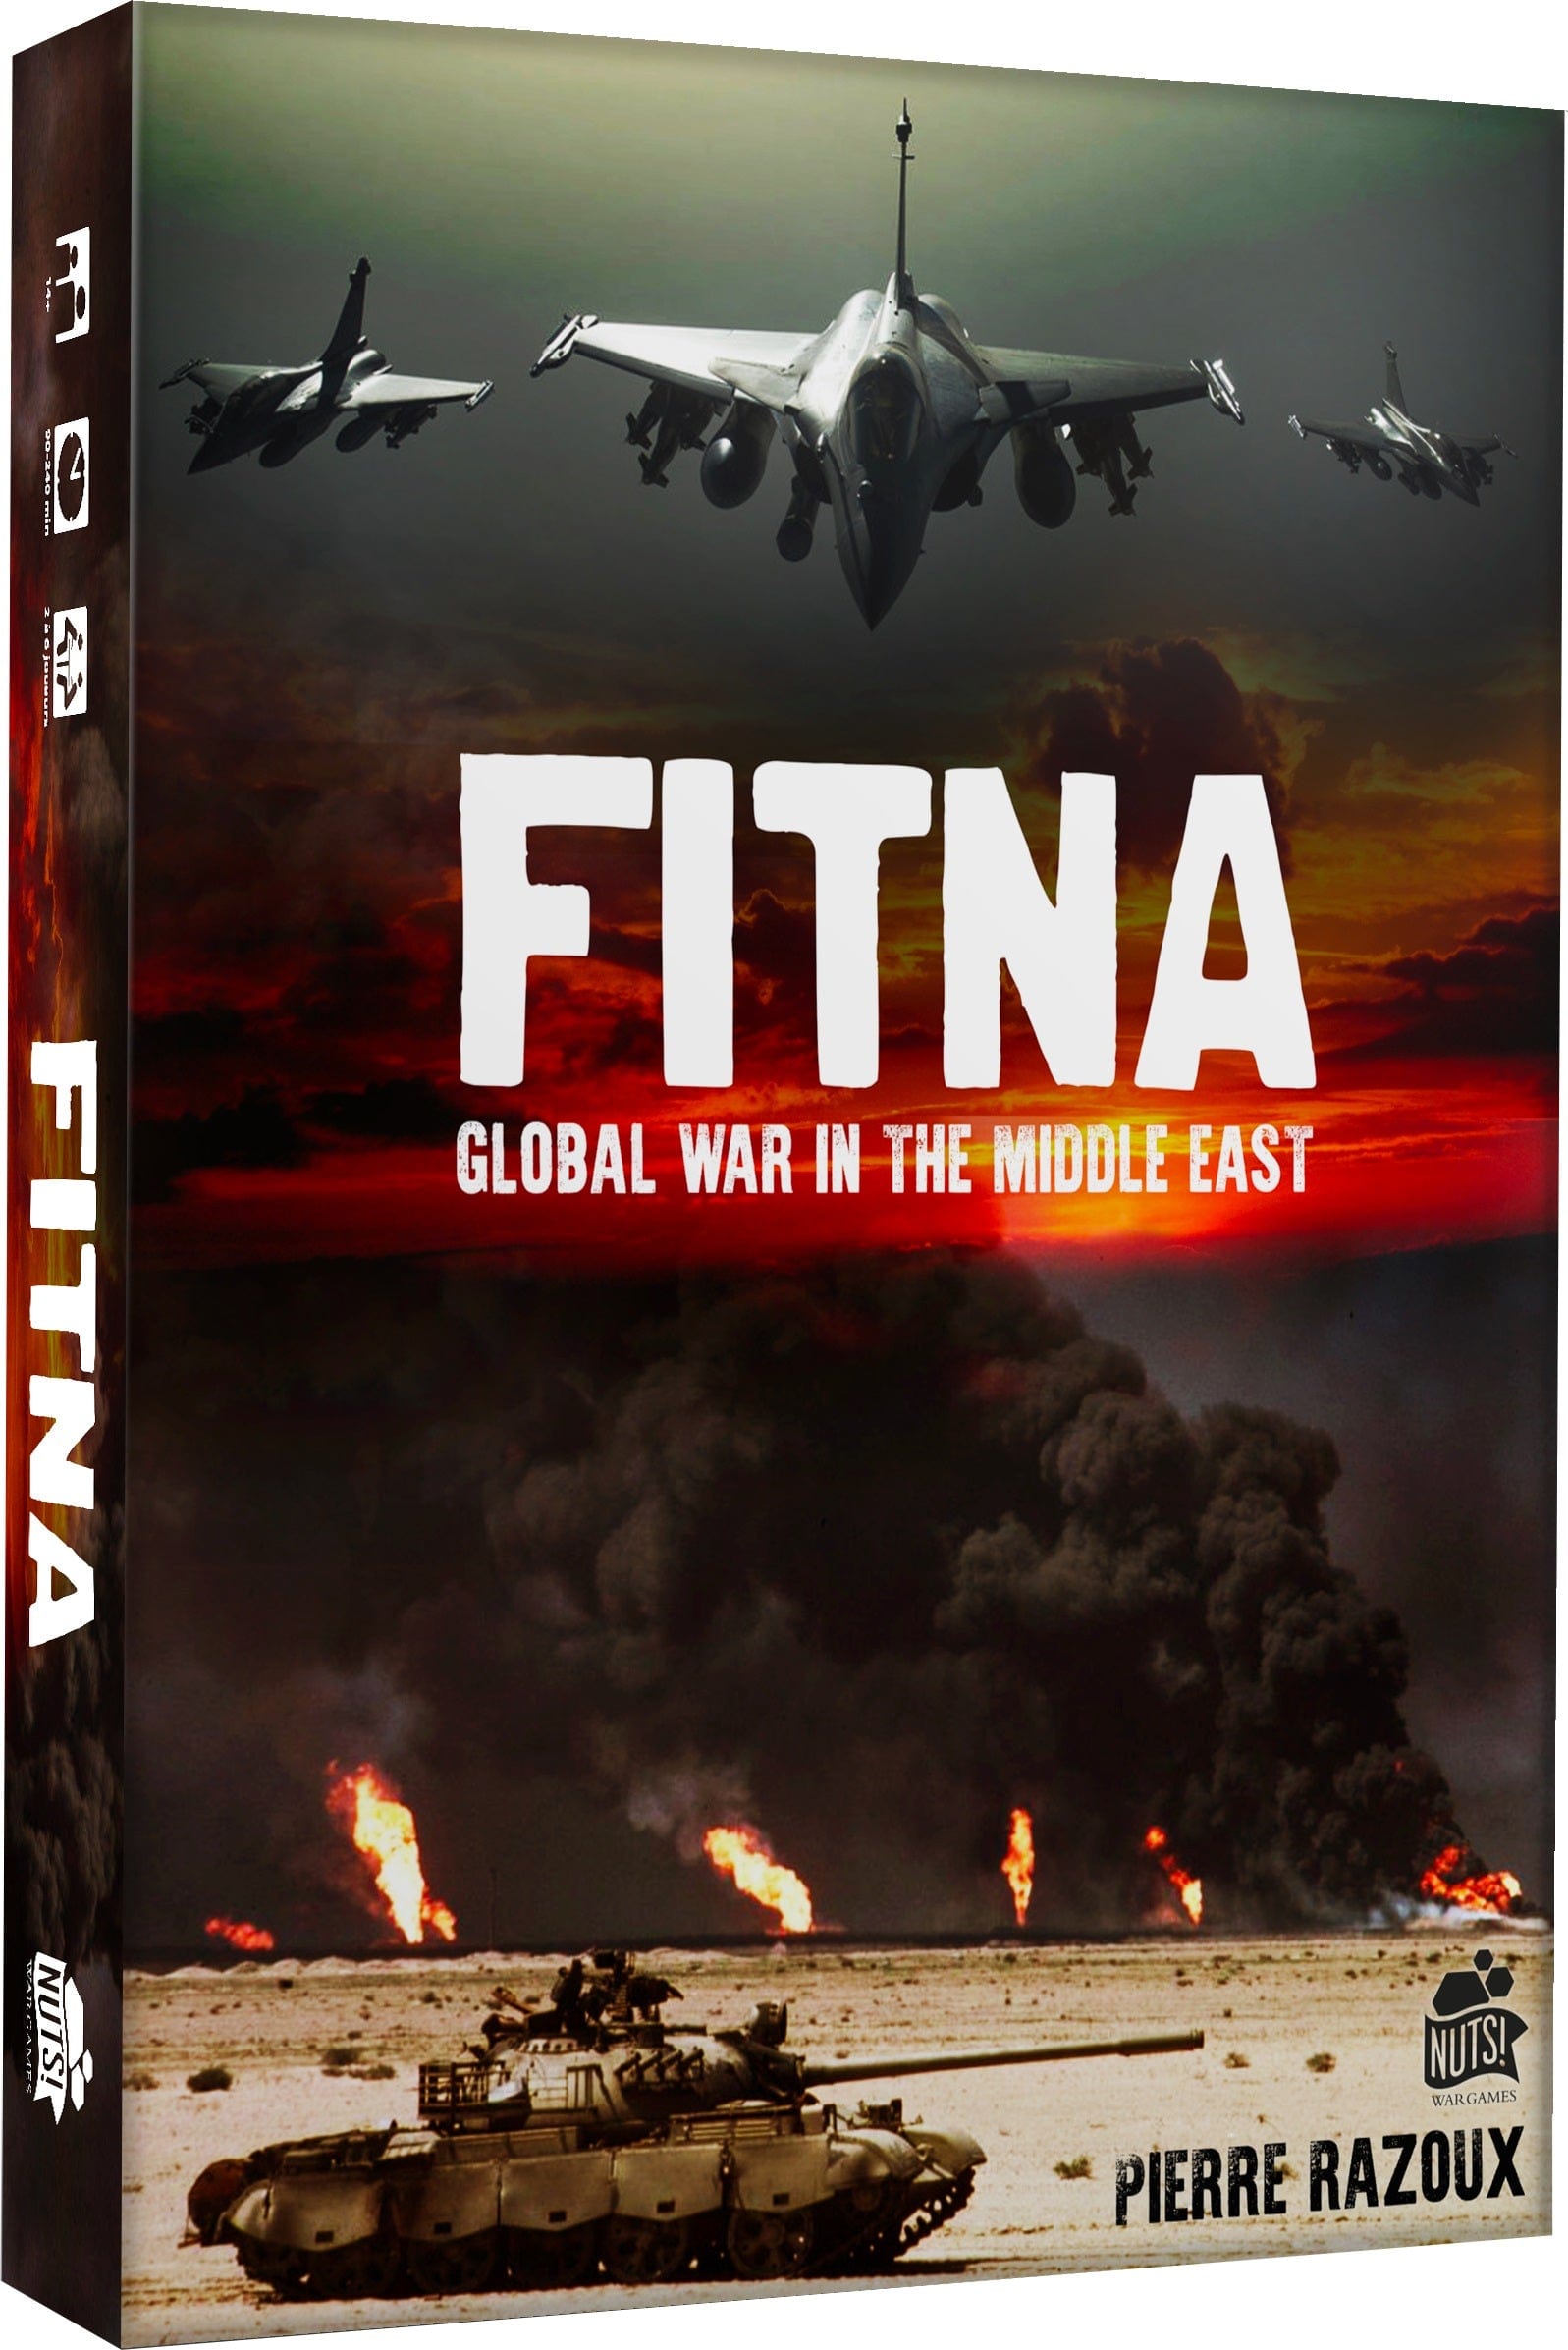 Fitna: Global War in the Middle East - Third Eye